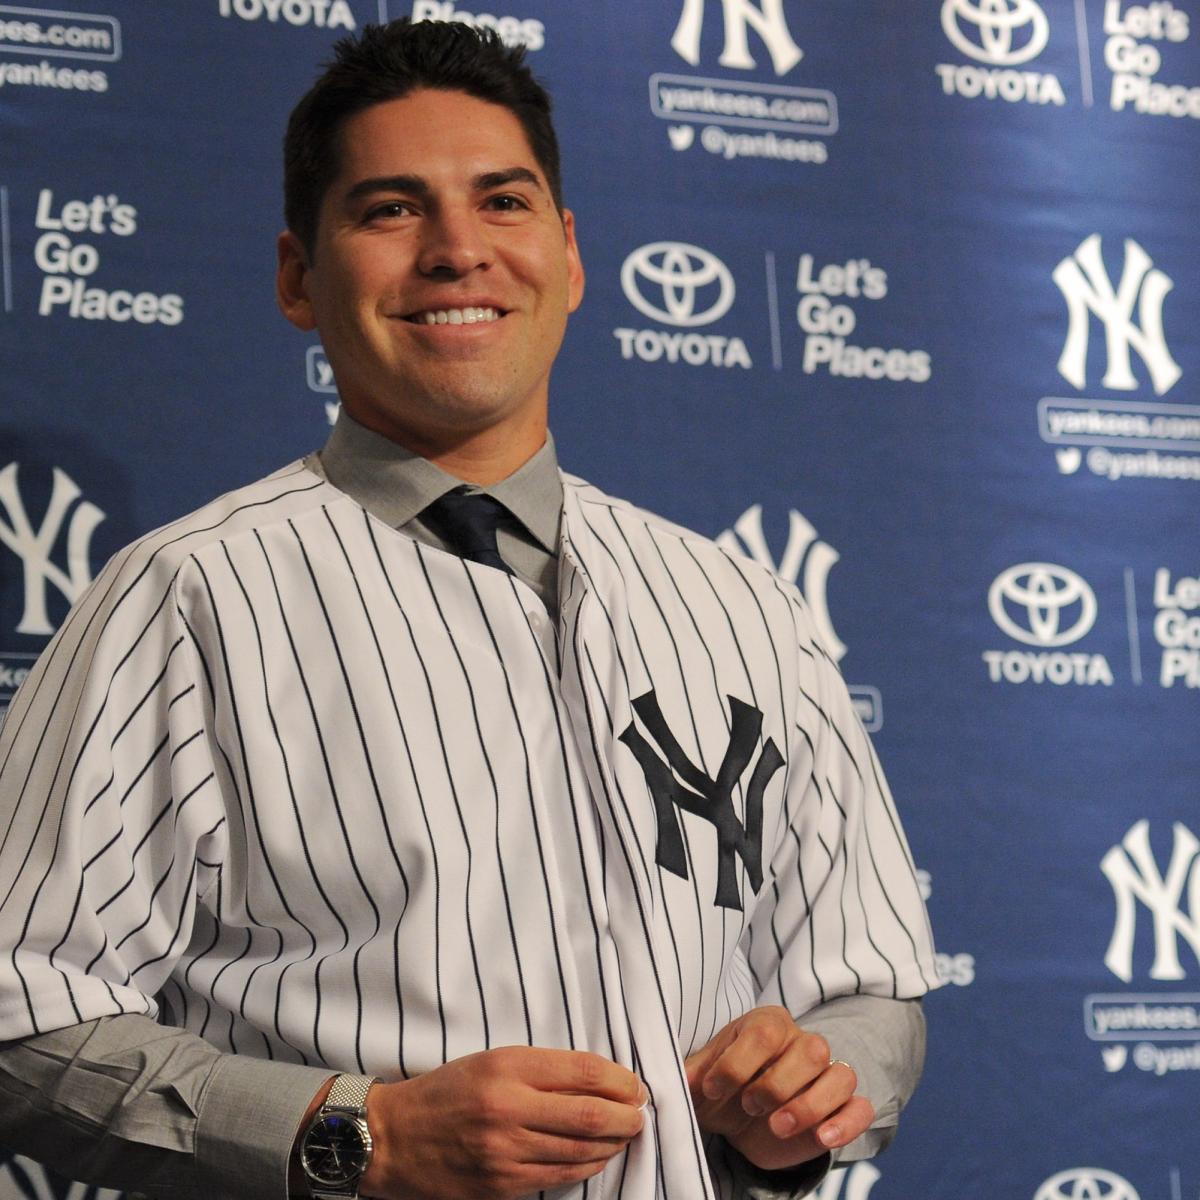 Yankees claiming Jacoby Ellsbury got unapproved treatments